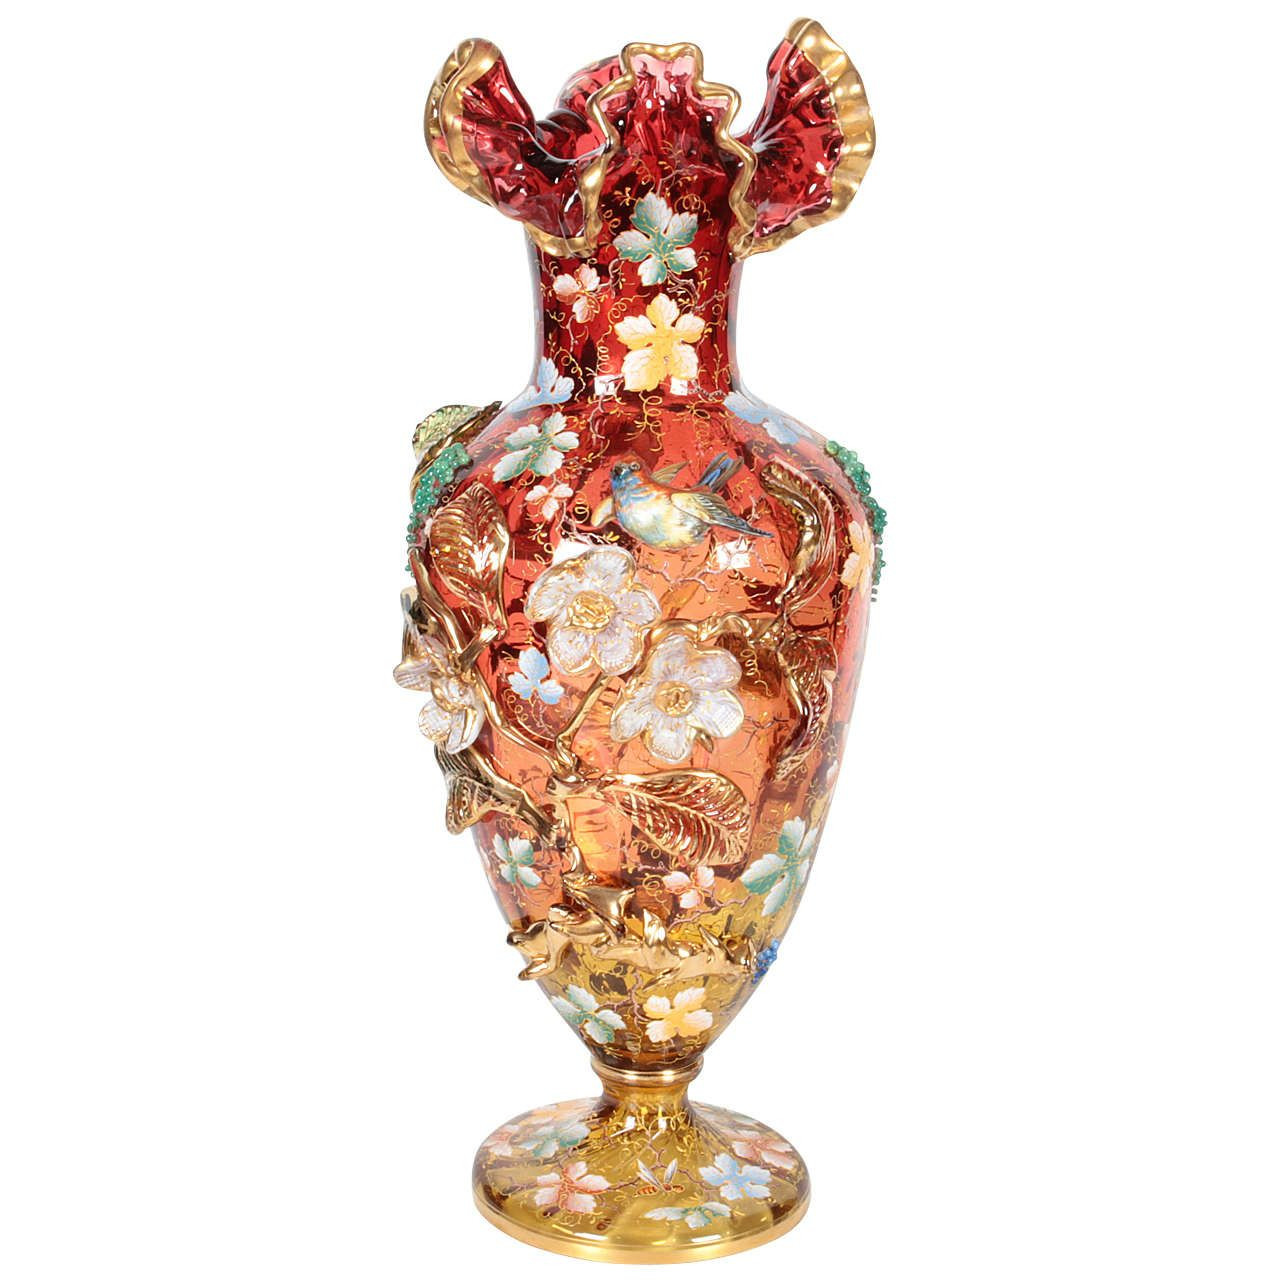 23 Lovely Modern Crystal Vase 2024 free download modern crystal vase of moser glass amberina red vase with raised flowers leaves jewels with moser glass amberina red vase with raised flowers leaves jewels and bird from a unique collection 